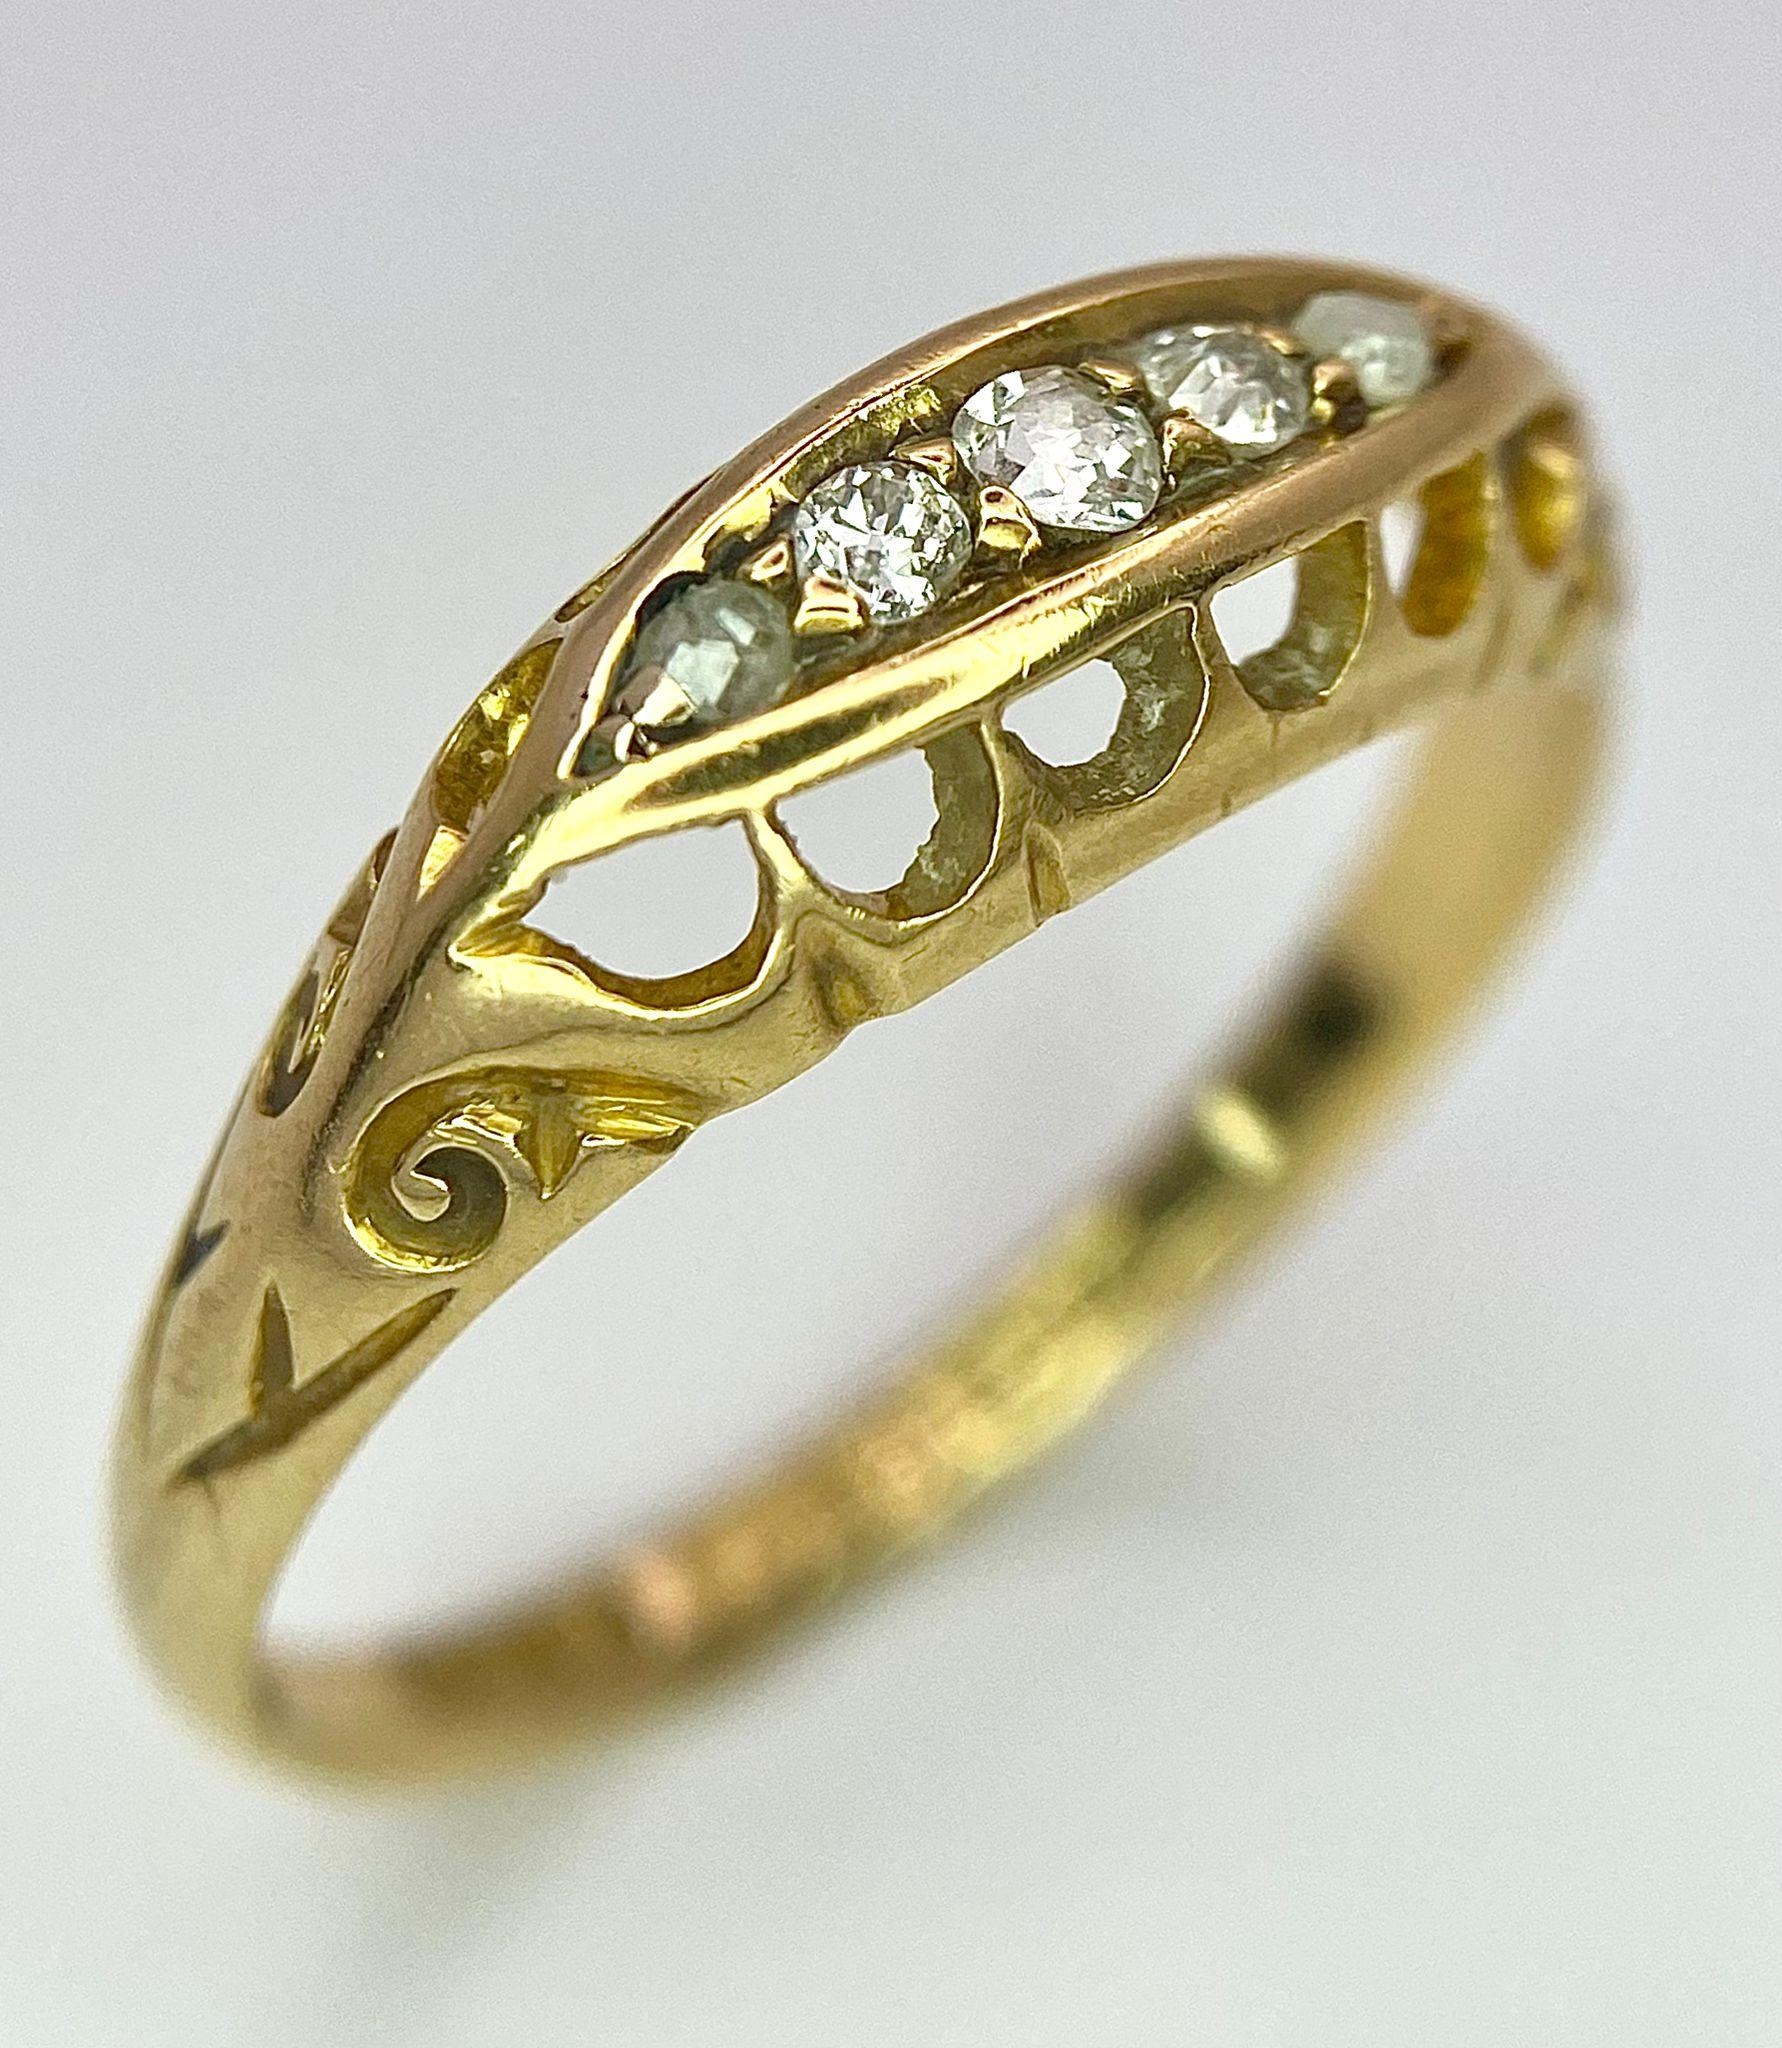 A Vintage 18K Yellow Gold Five Stone Diamond Ring. Full UK hallmarks. Size P. 2.5g total weight. - Image 3 of 8